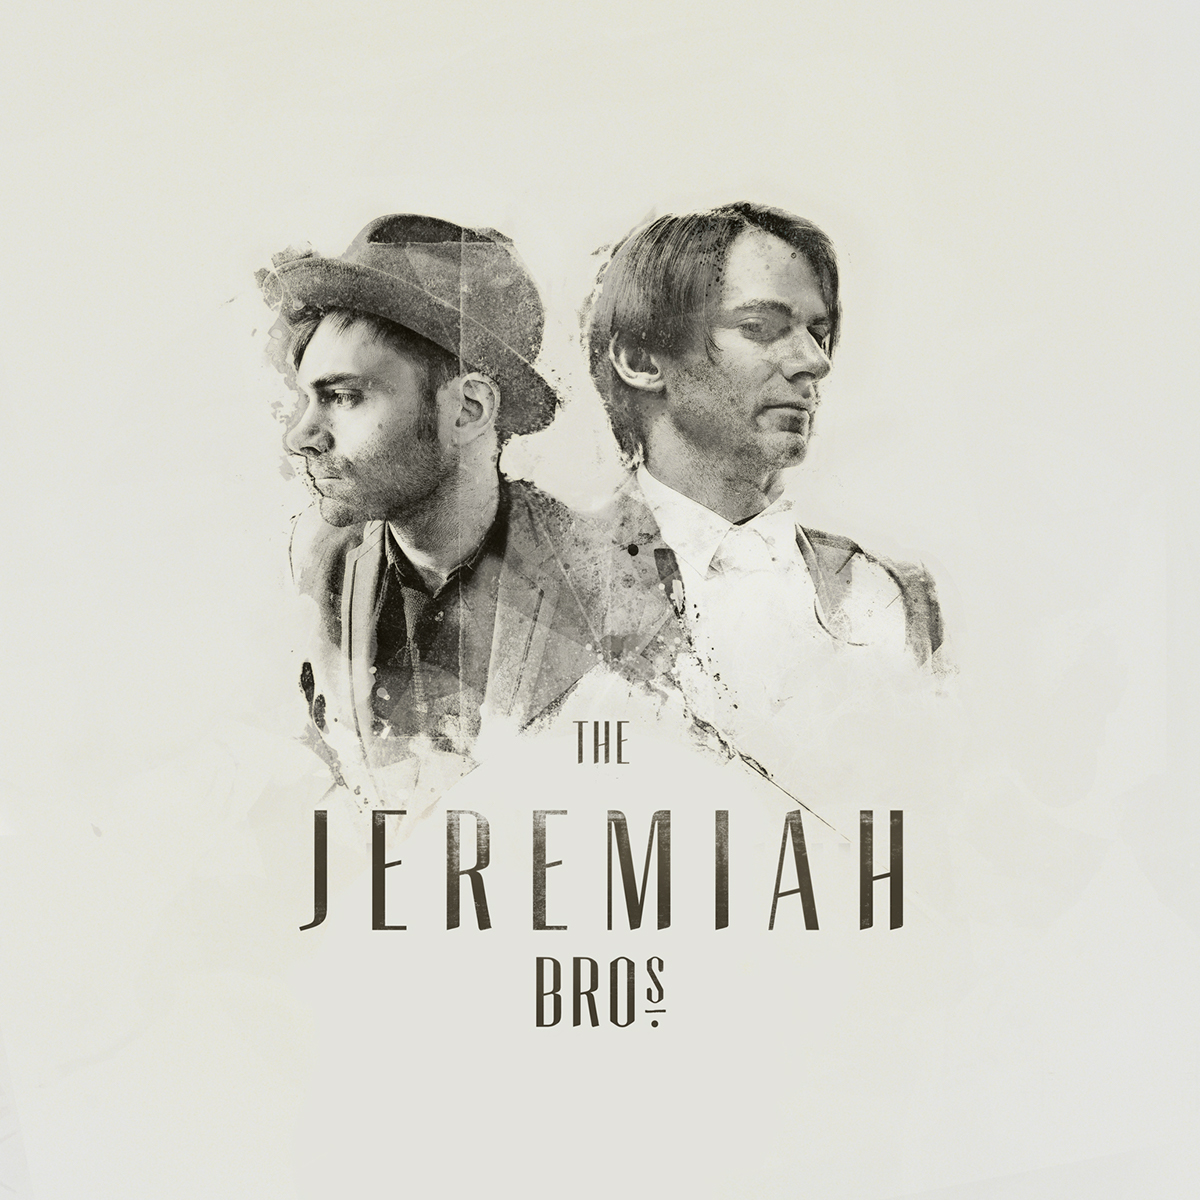 the jeremiah brother cd folk cover graphic snoodge Album